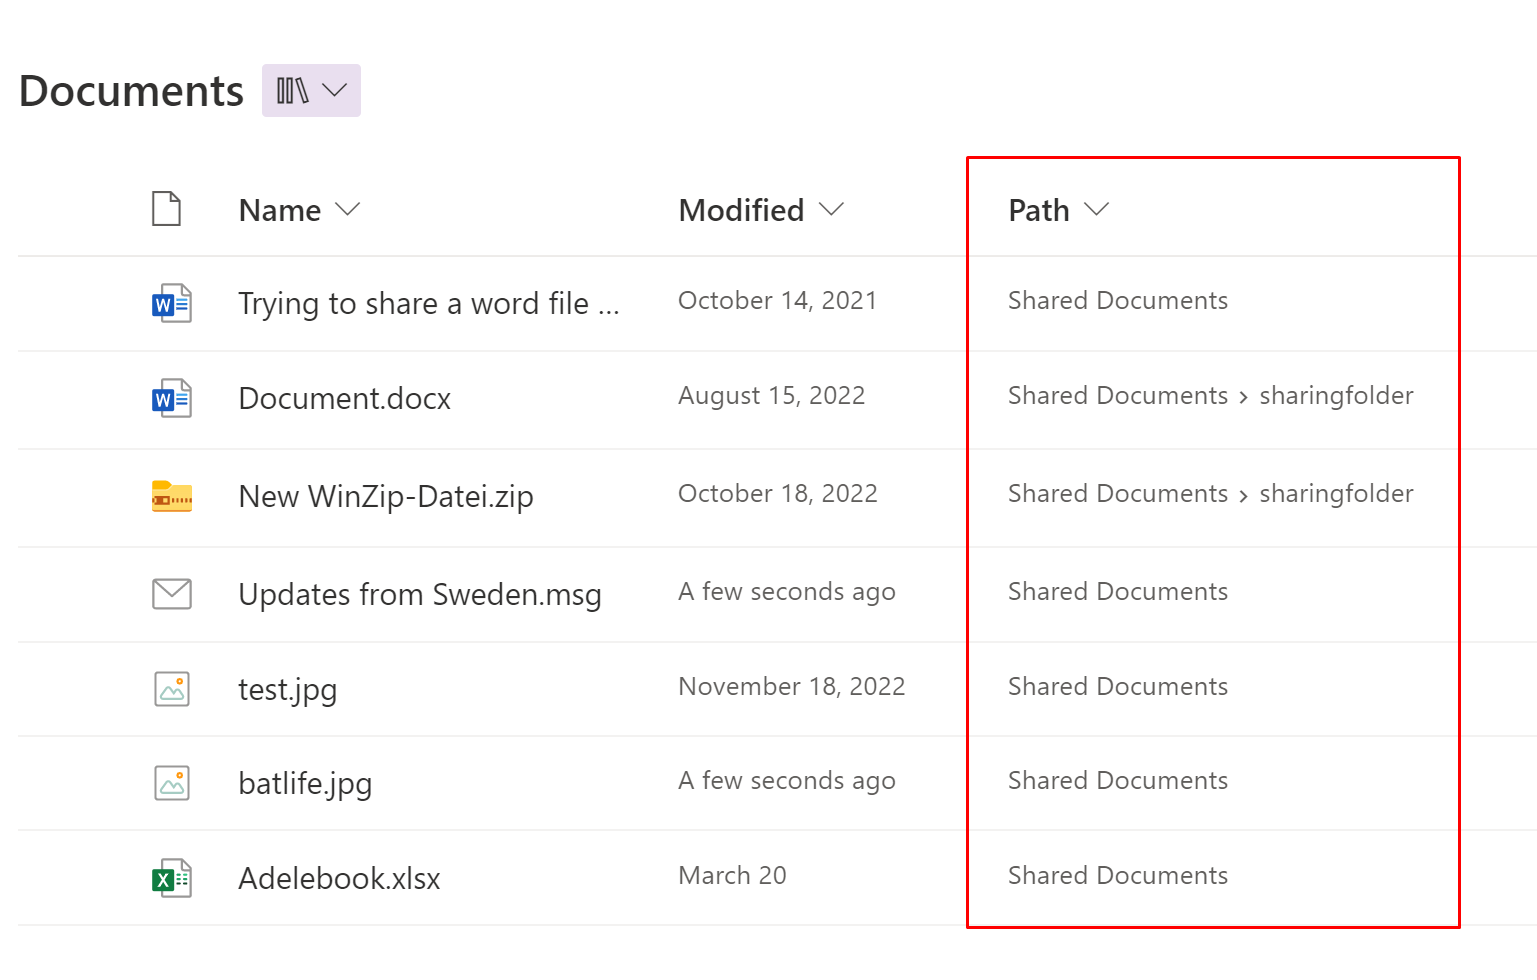 image from Show Path Column in SharePoint